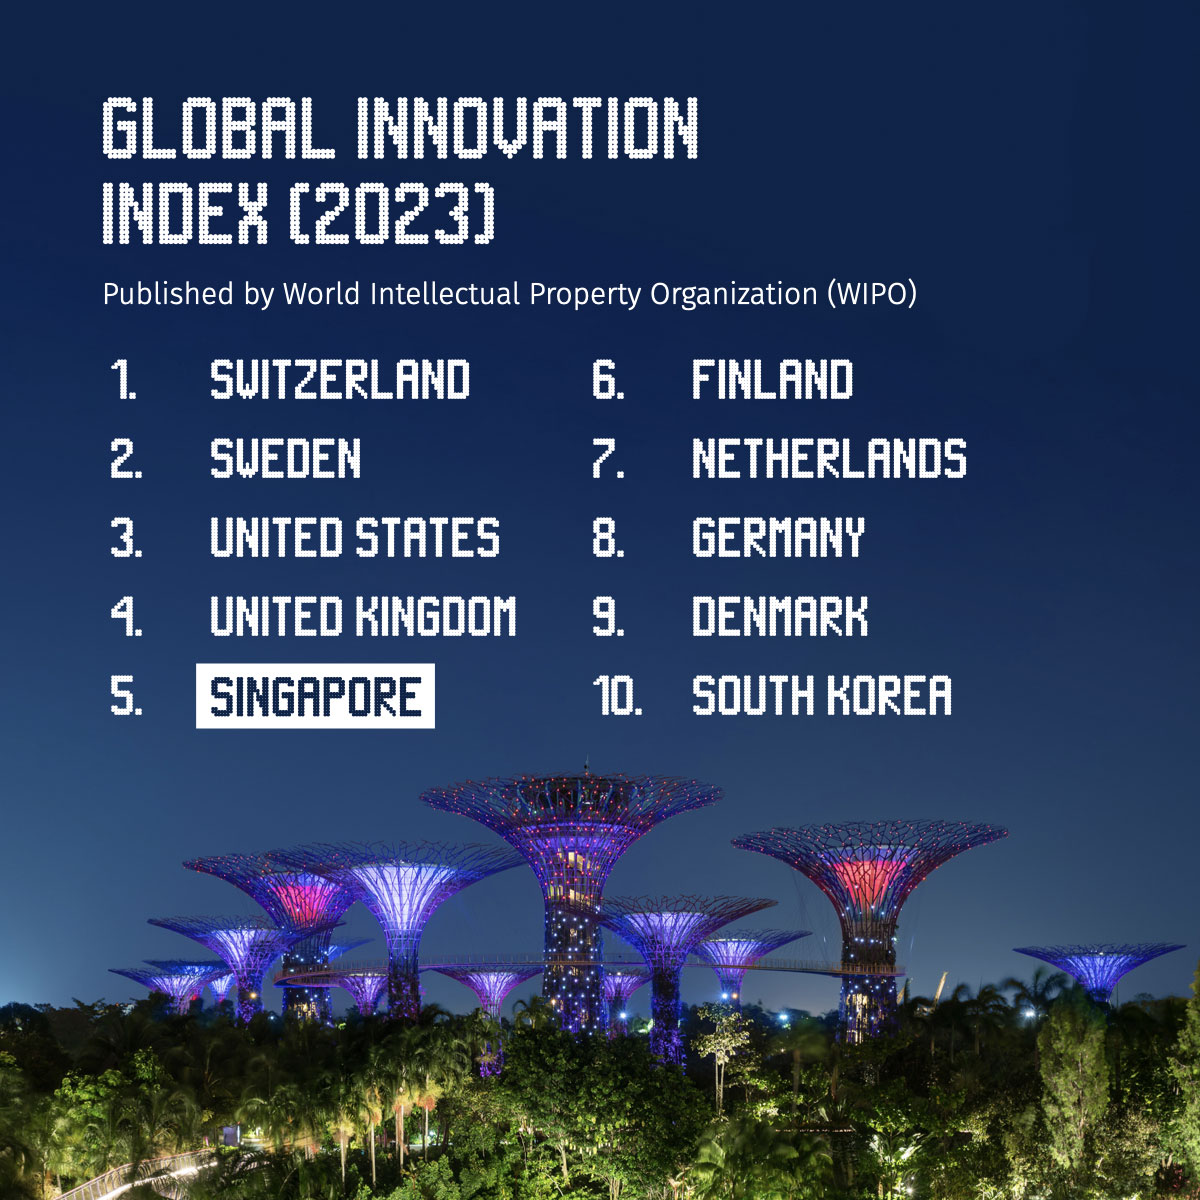 WIPO Global Innovation Index 2023 (Singapore is placed 5th in the ranking)